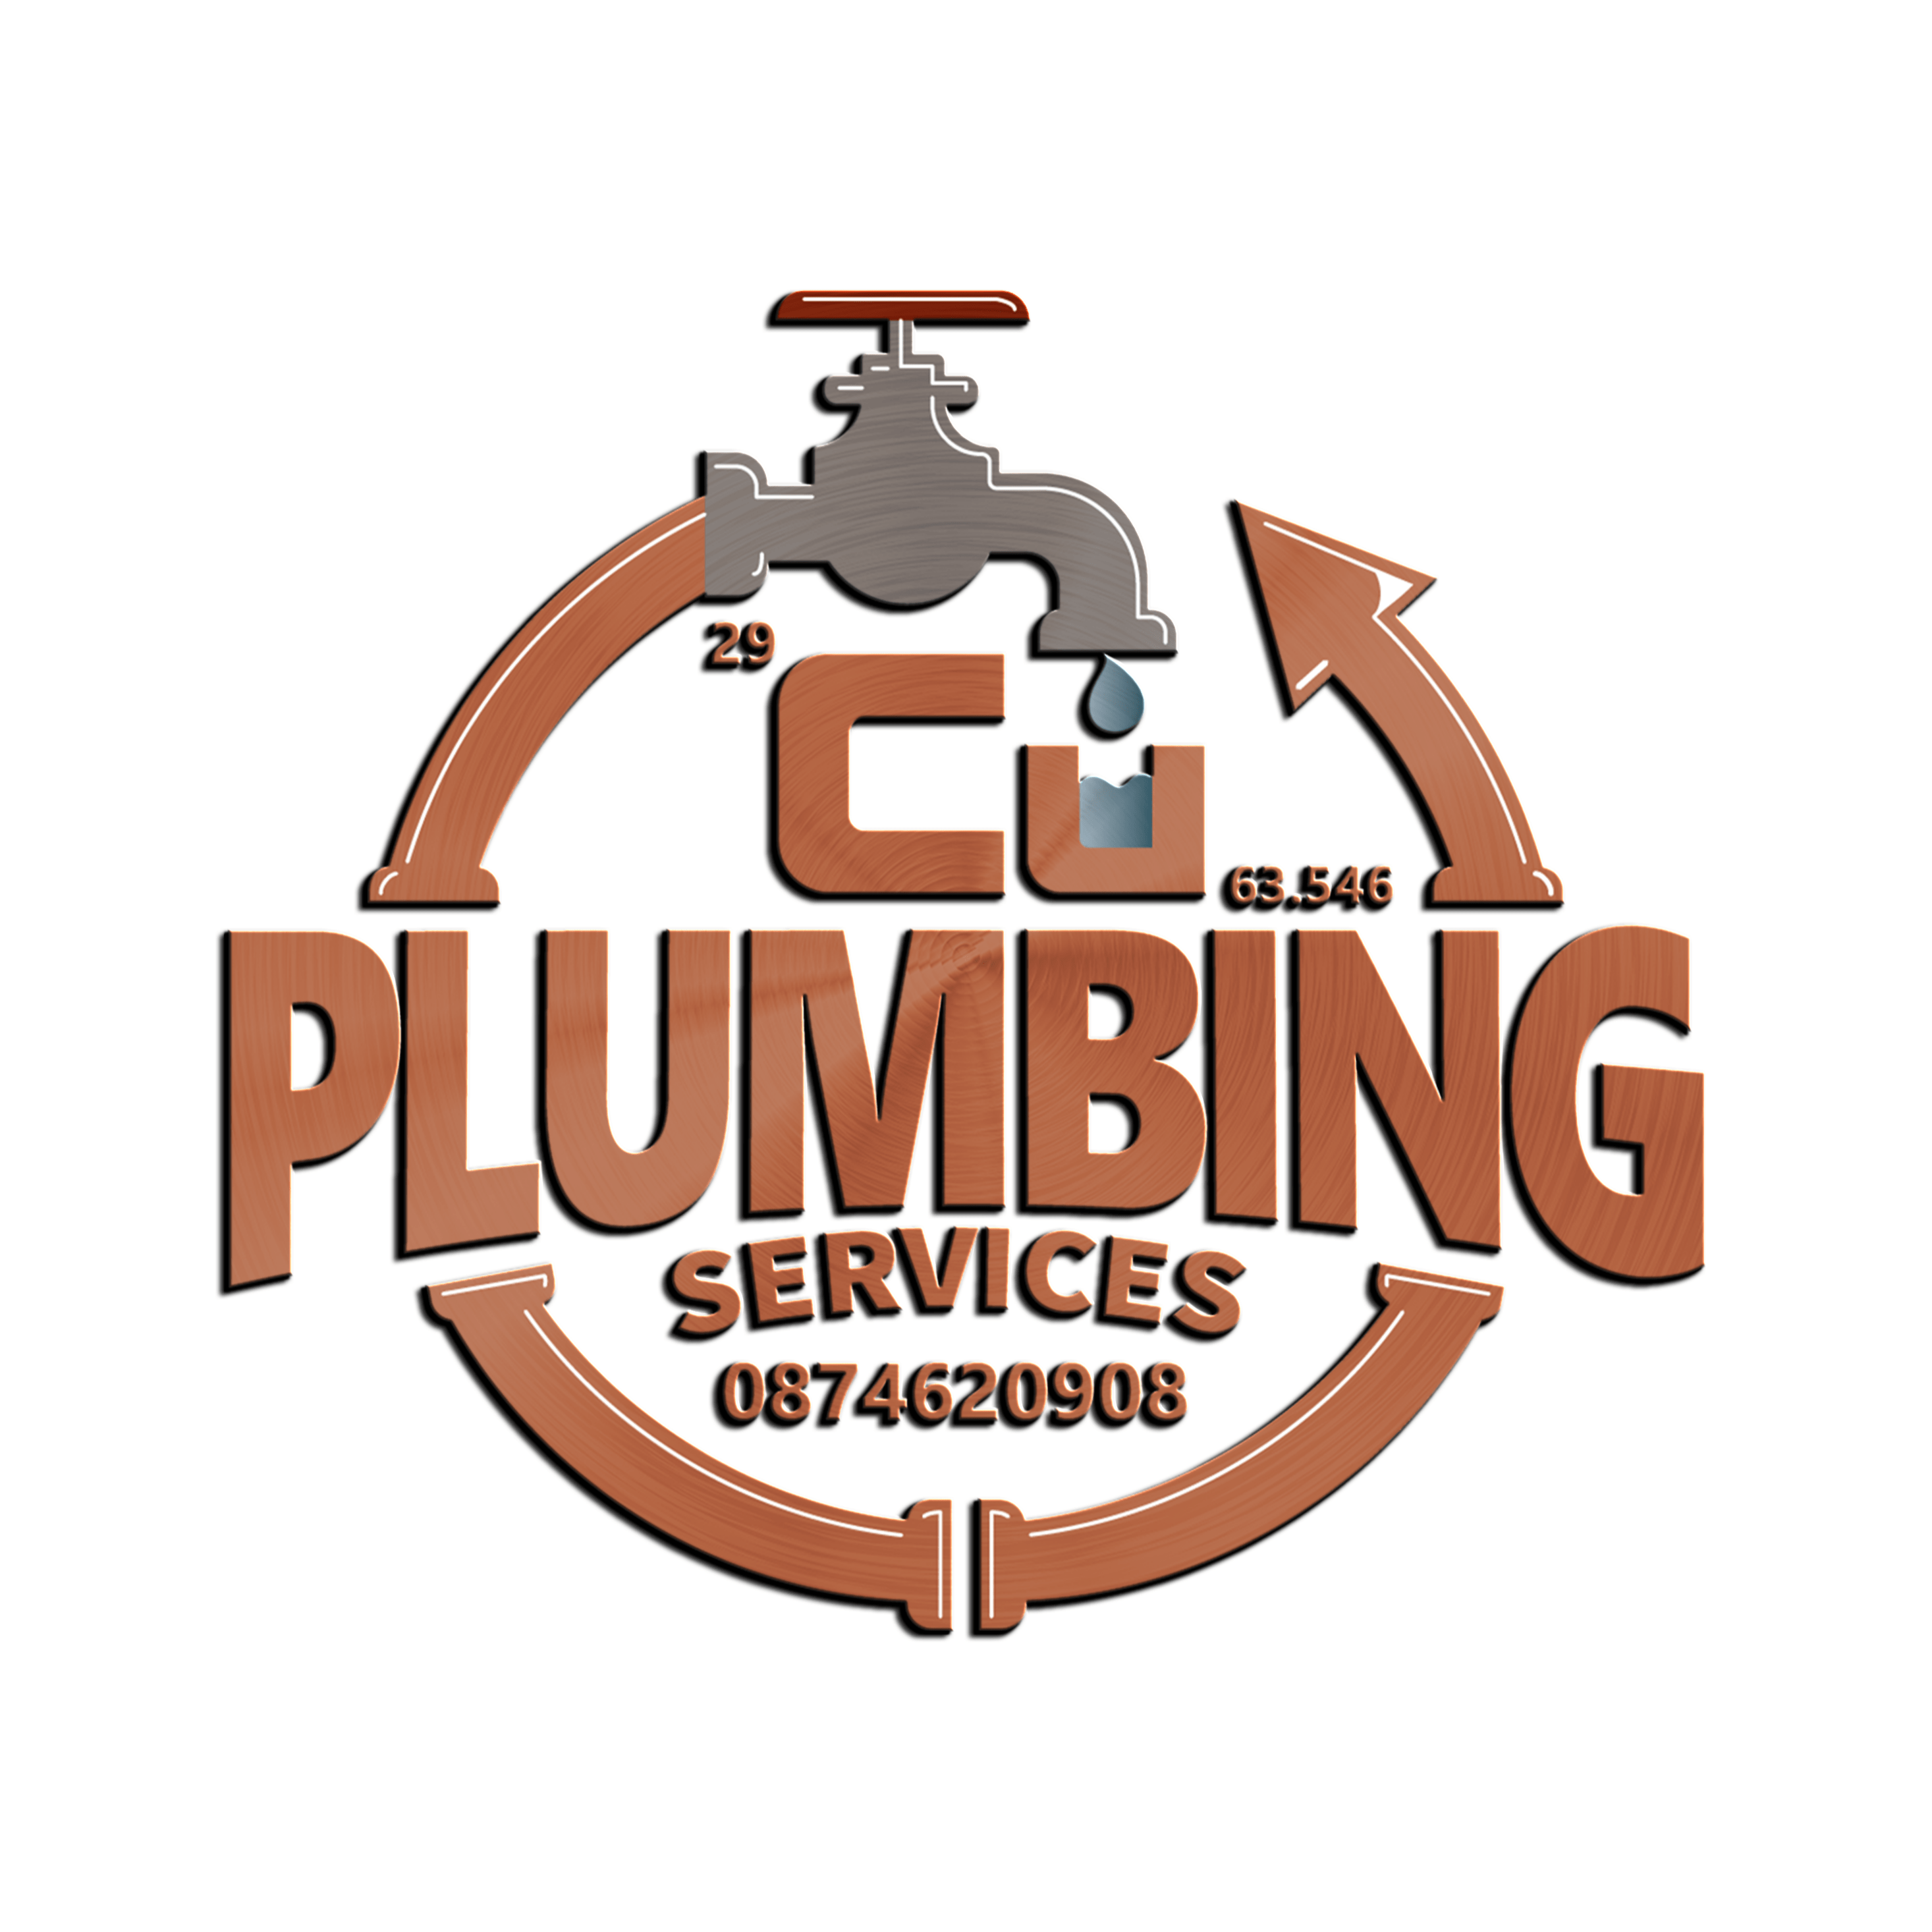 Top-rated plumber in Killester